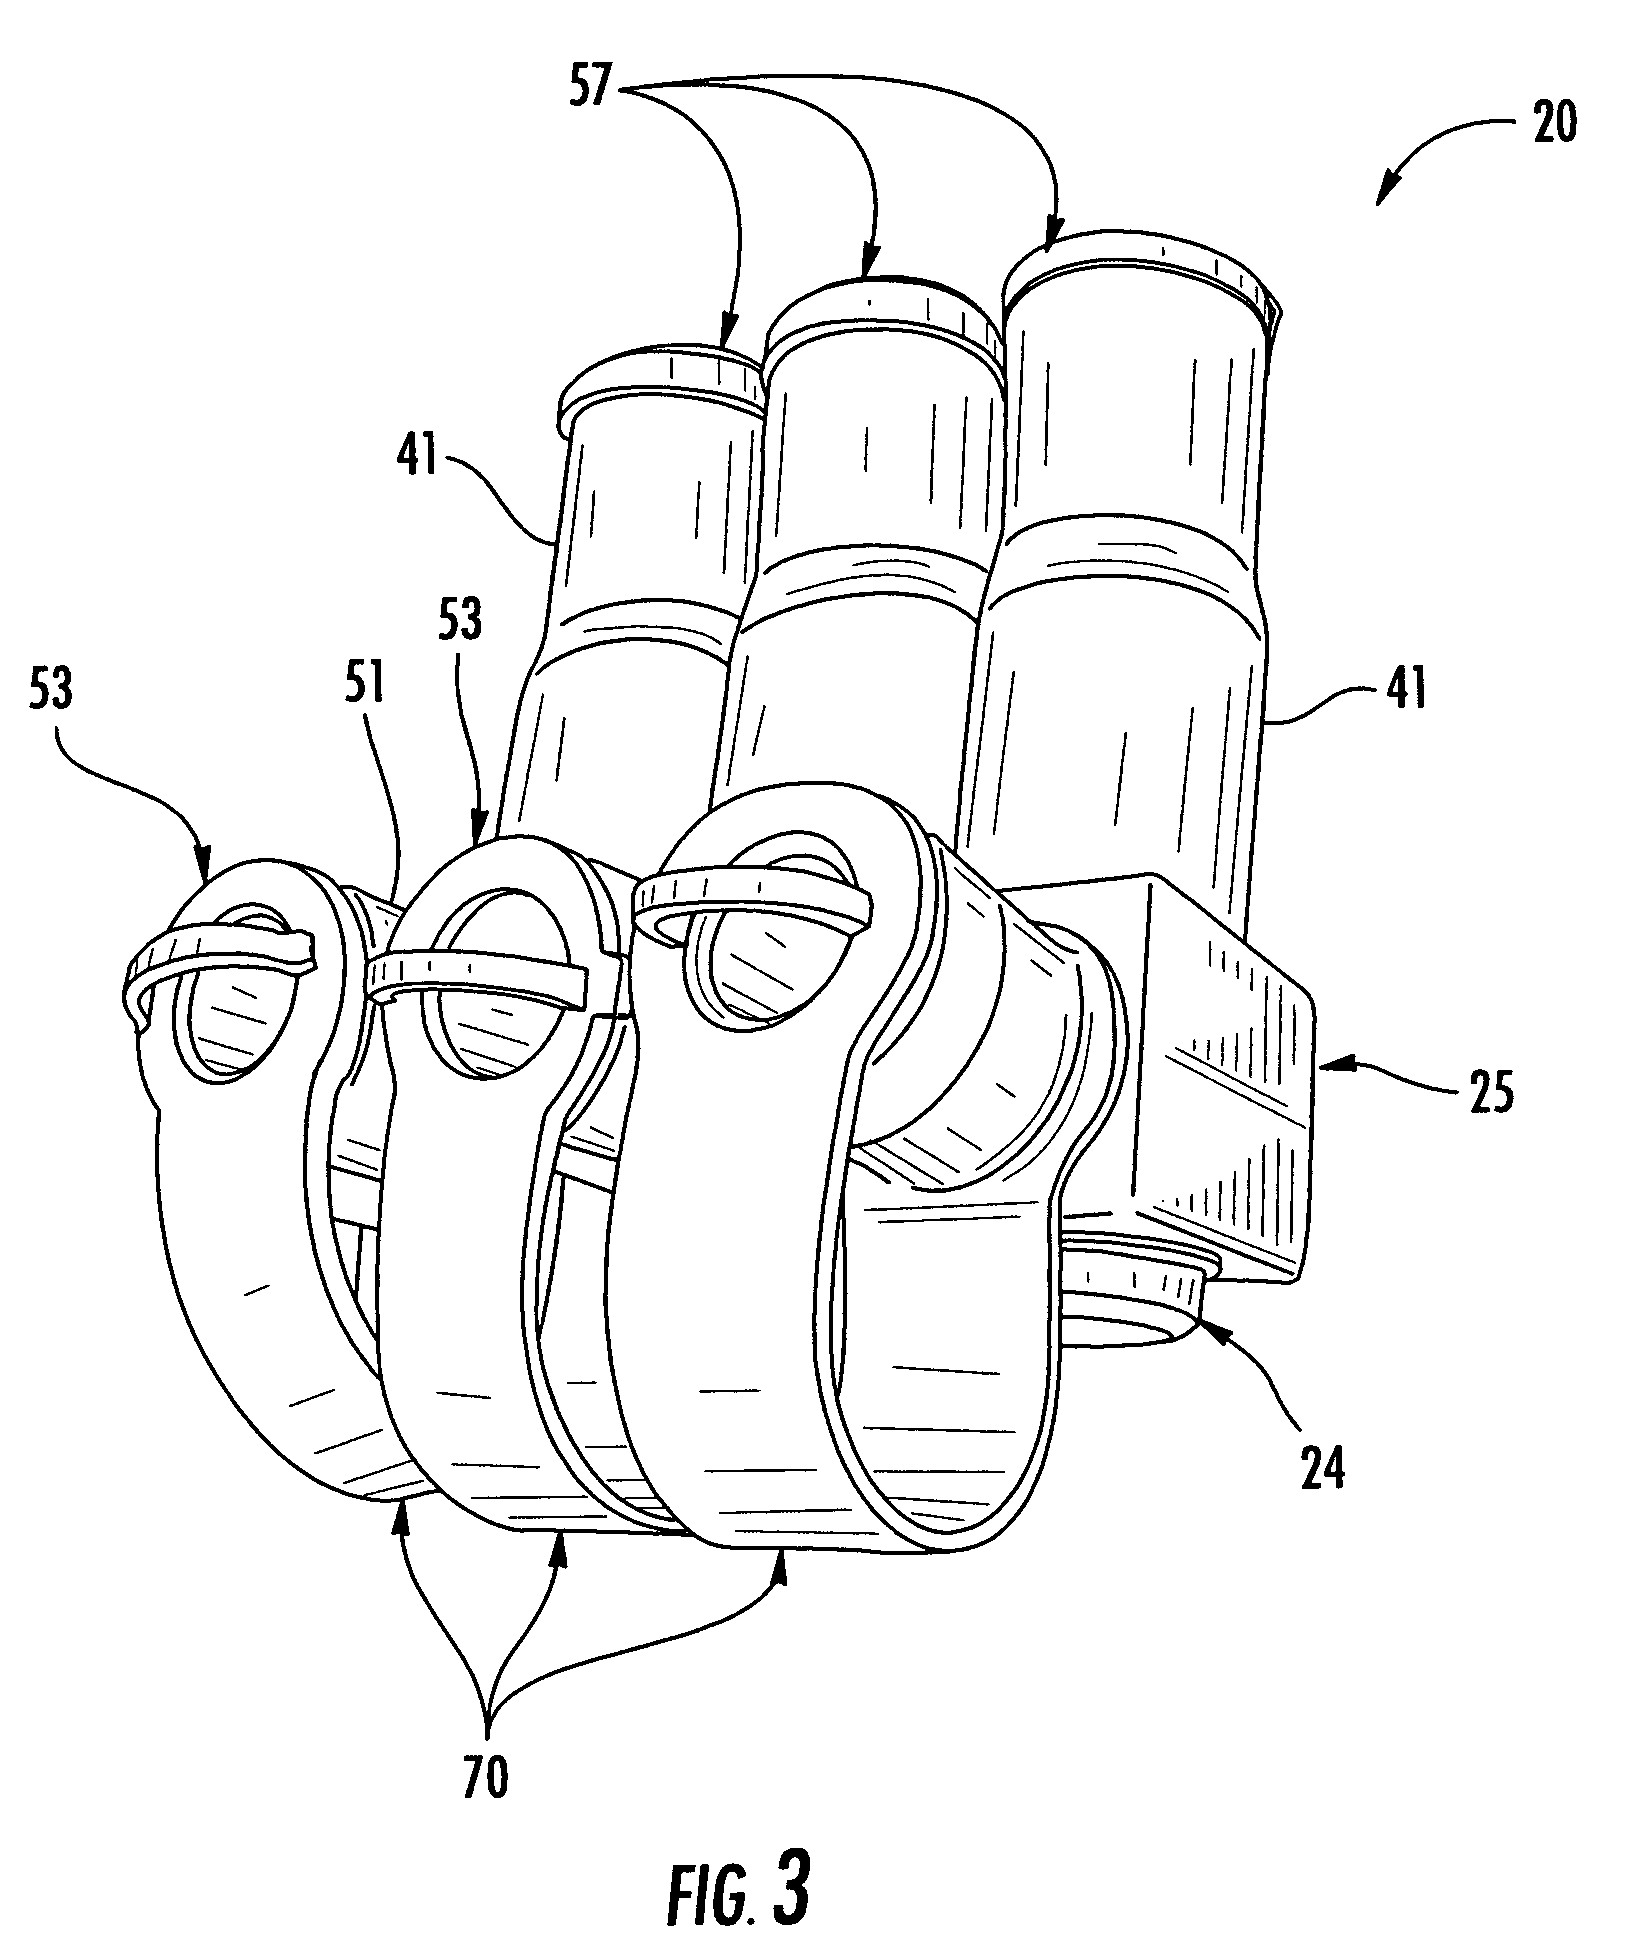 Electrical connector including insulating boots and associated methods